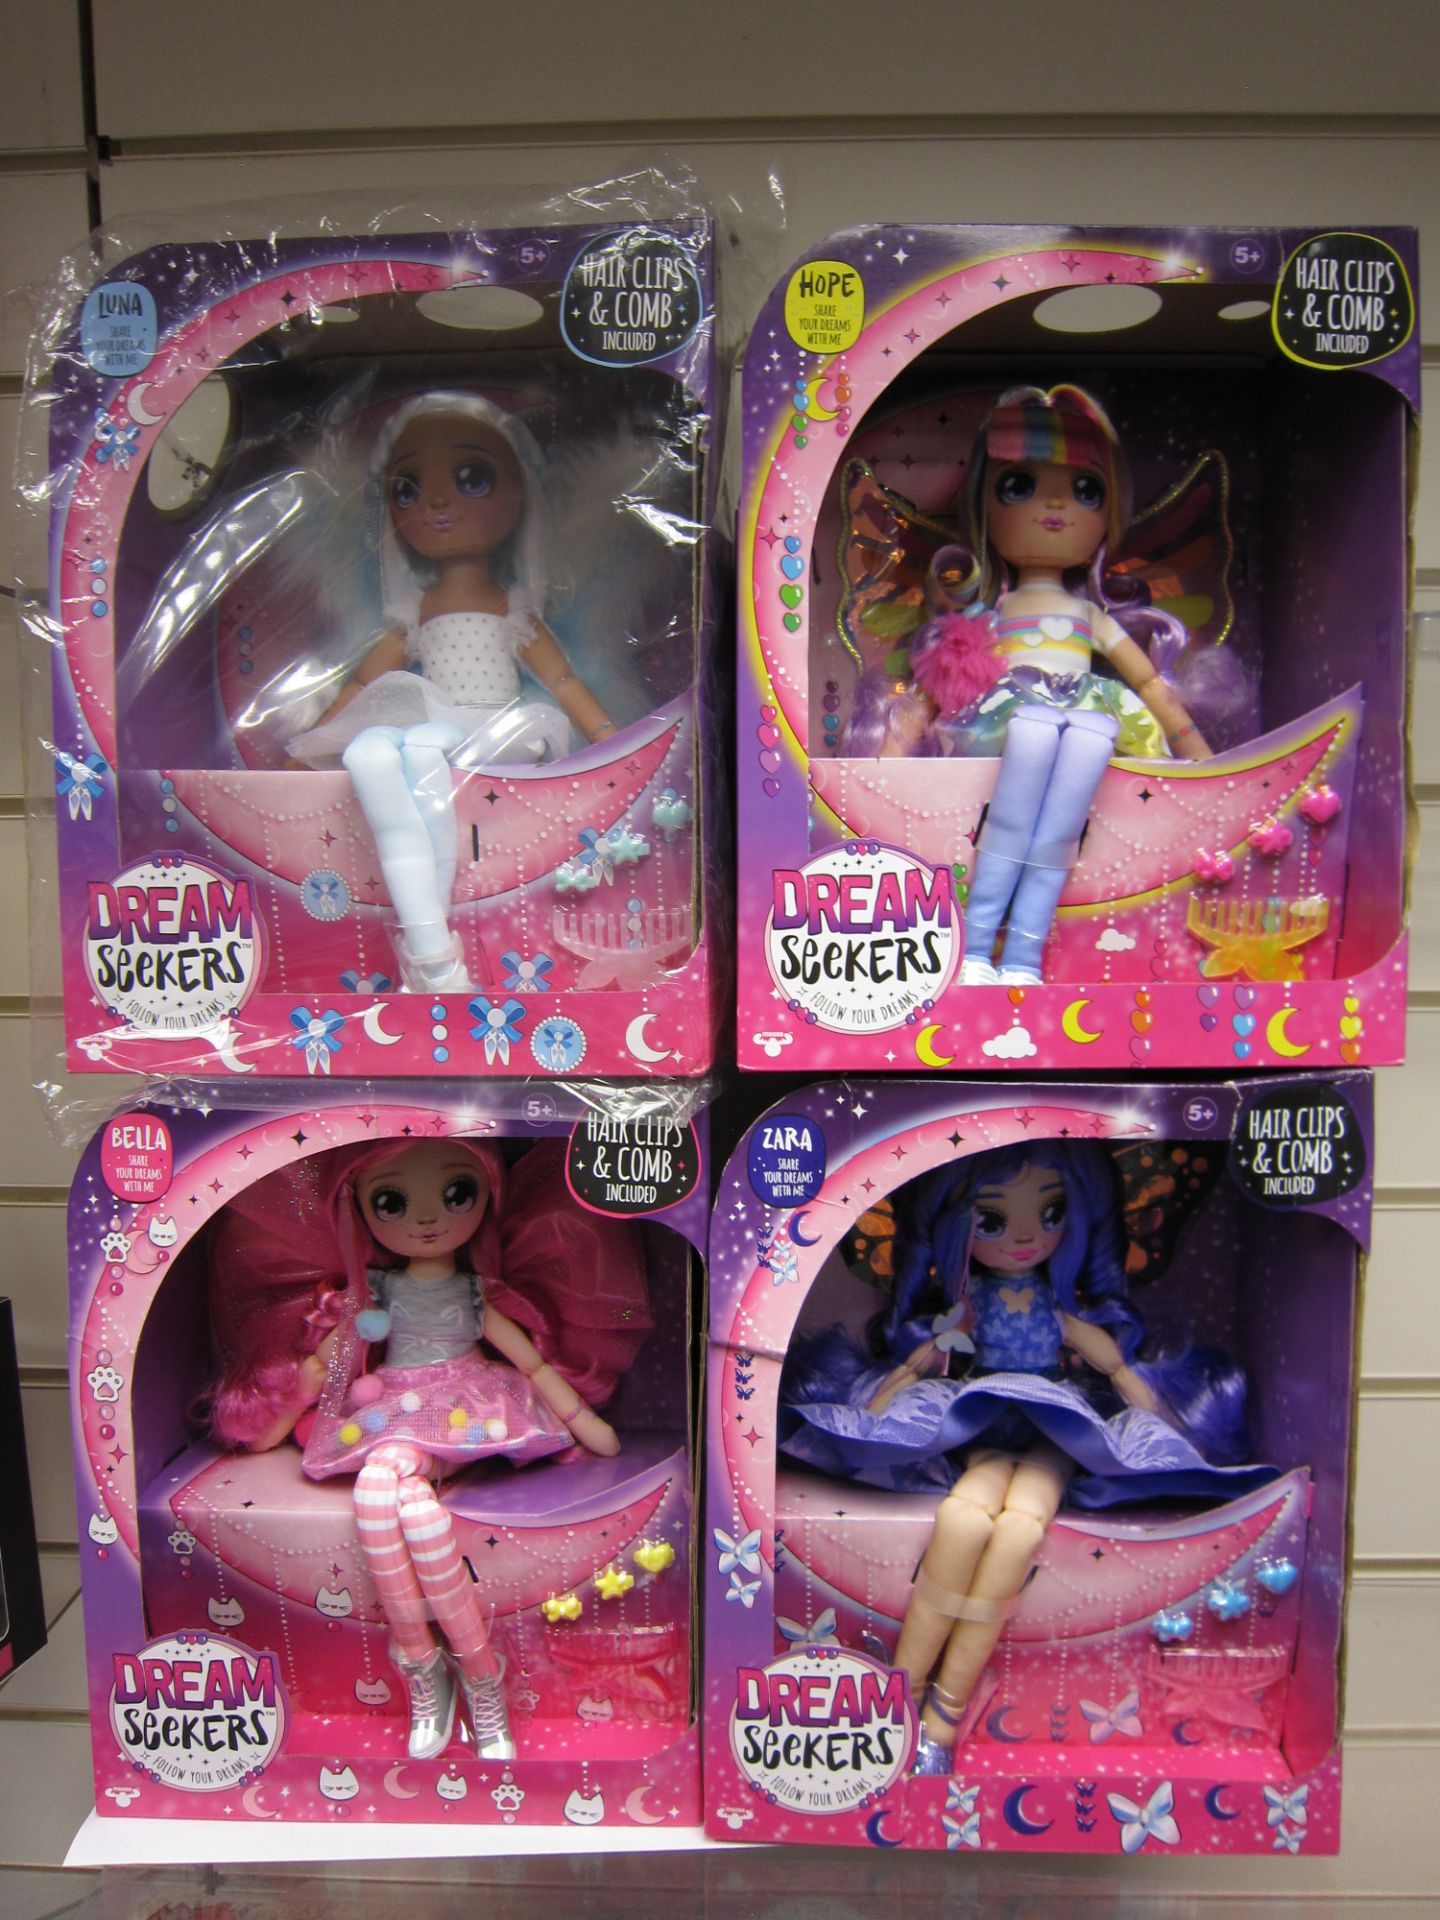 10 Pcs Assorted Brand New Dream Seekers Dolls With Accessories Sealed Boxes Super Premium Quality